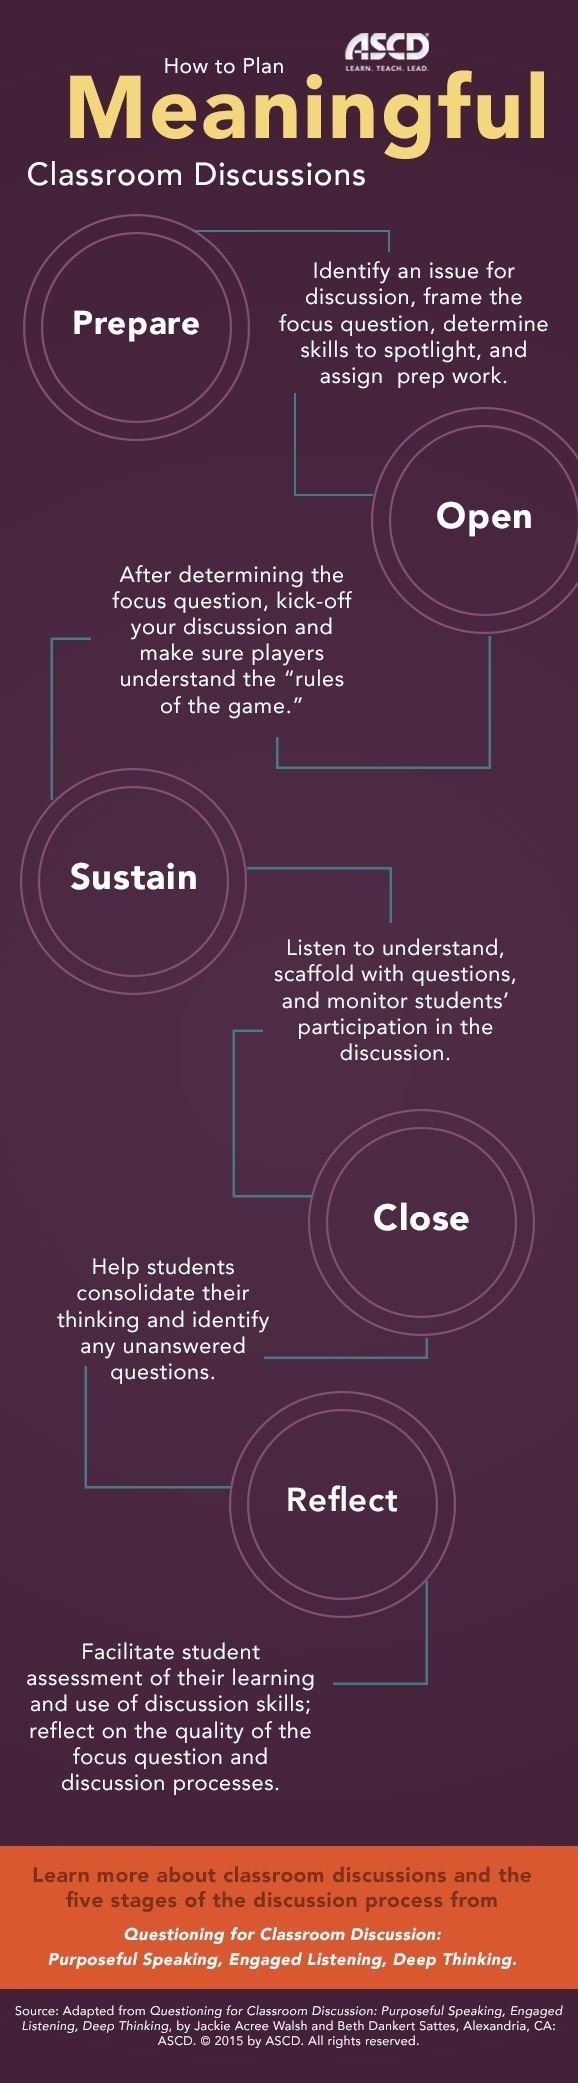 How to Plan Meaningful Classroom Discussions Infographic